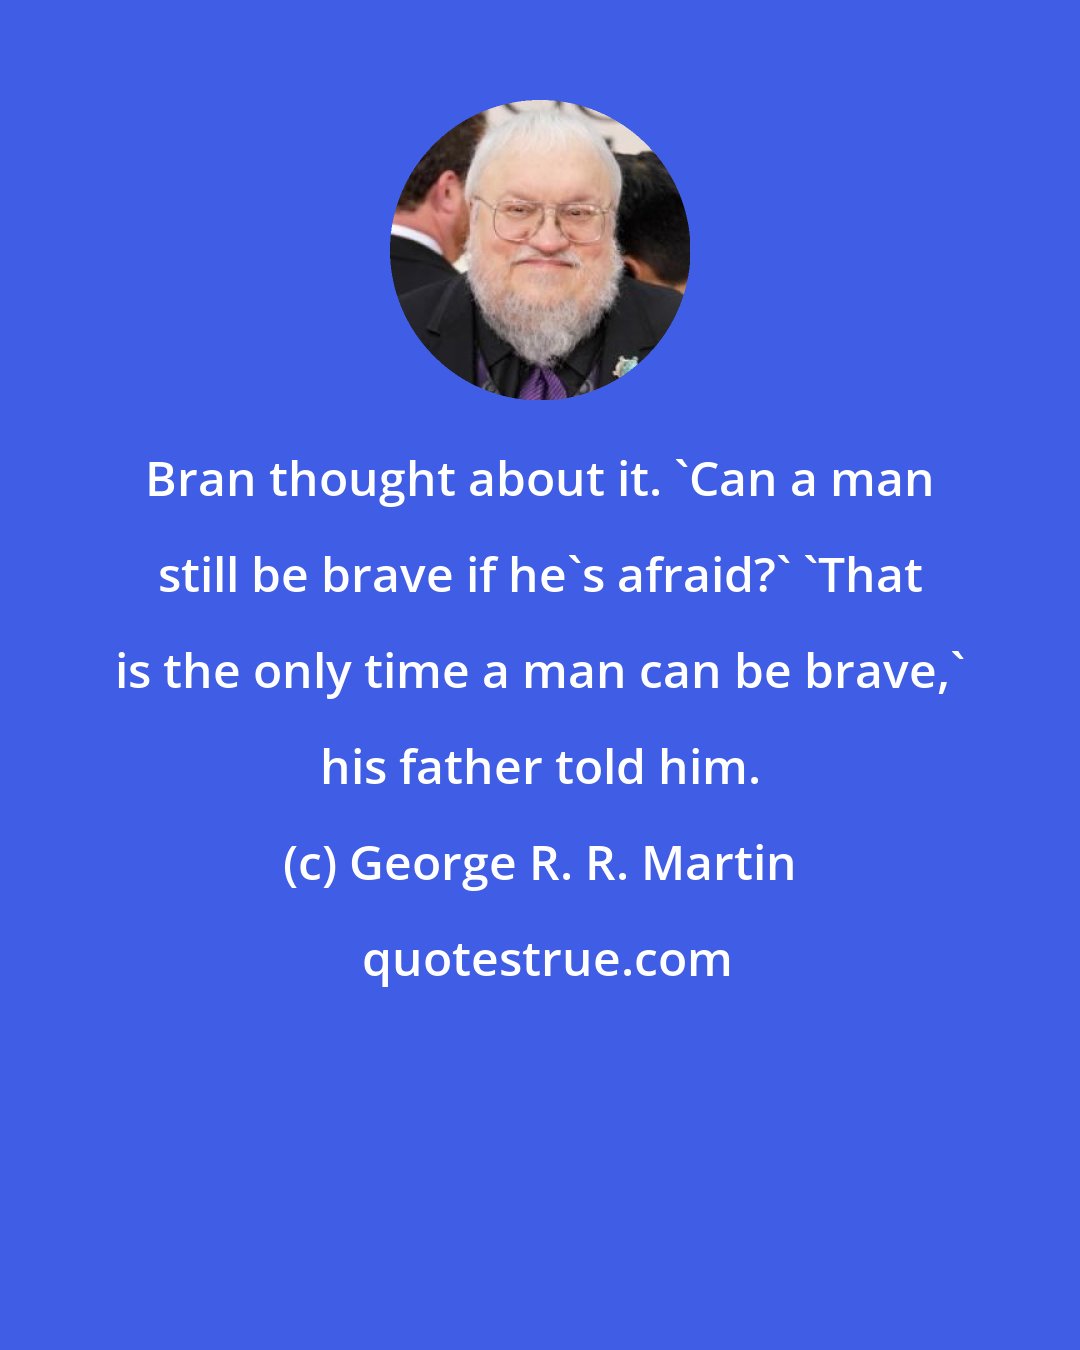 George R. R. Martin: Bran thought about it. 'Can a man still be brave if he's afraid?' 'That is the only time a man can be brave,' his father told him.